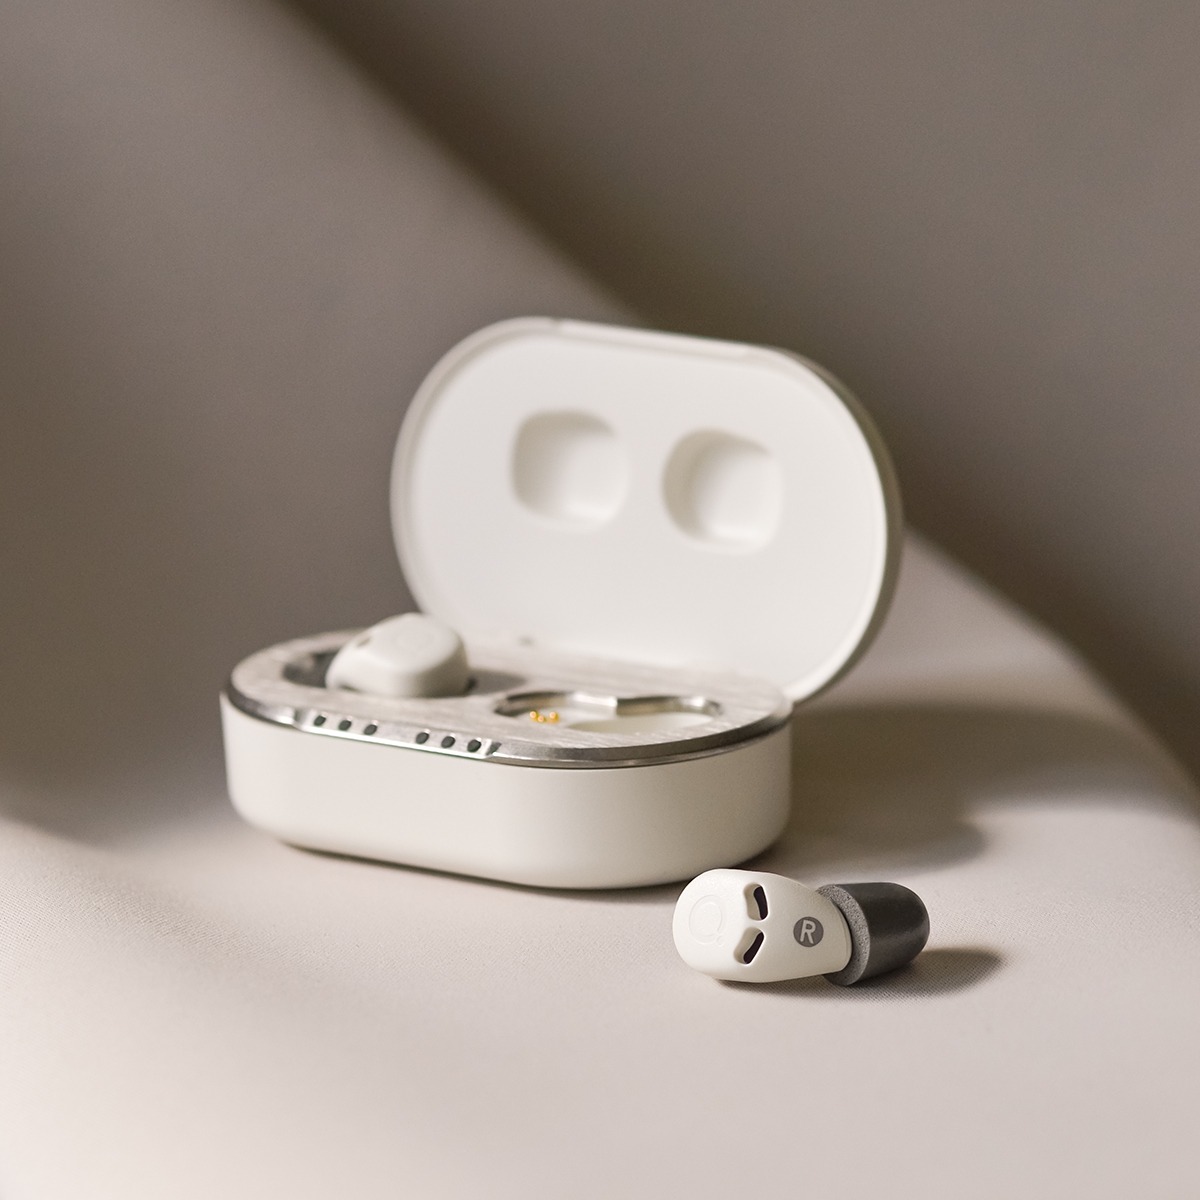 Experience the best noise cancelling earbuds